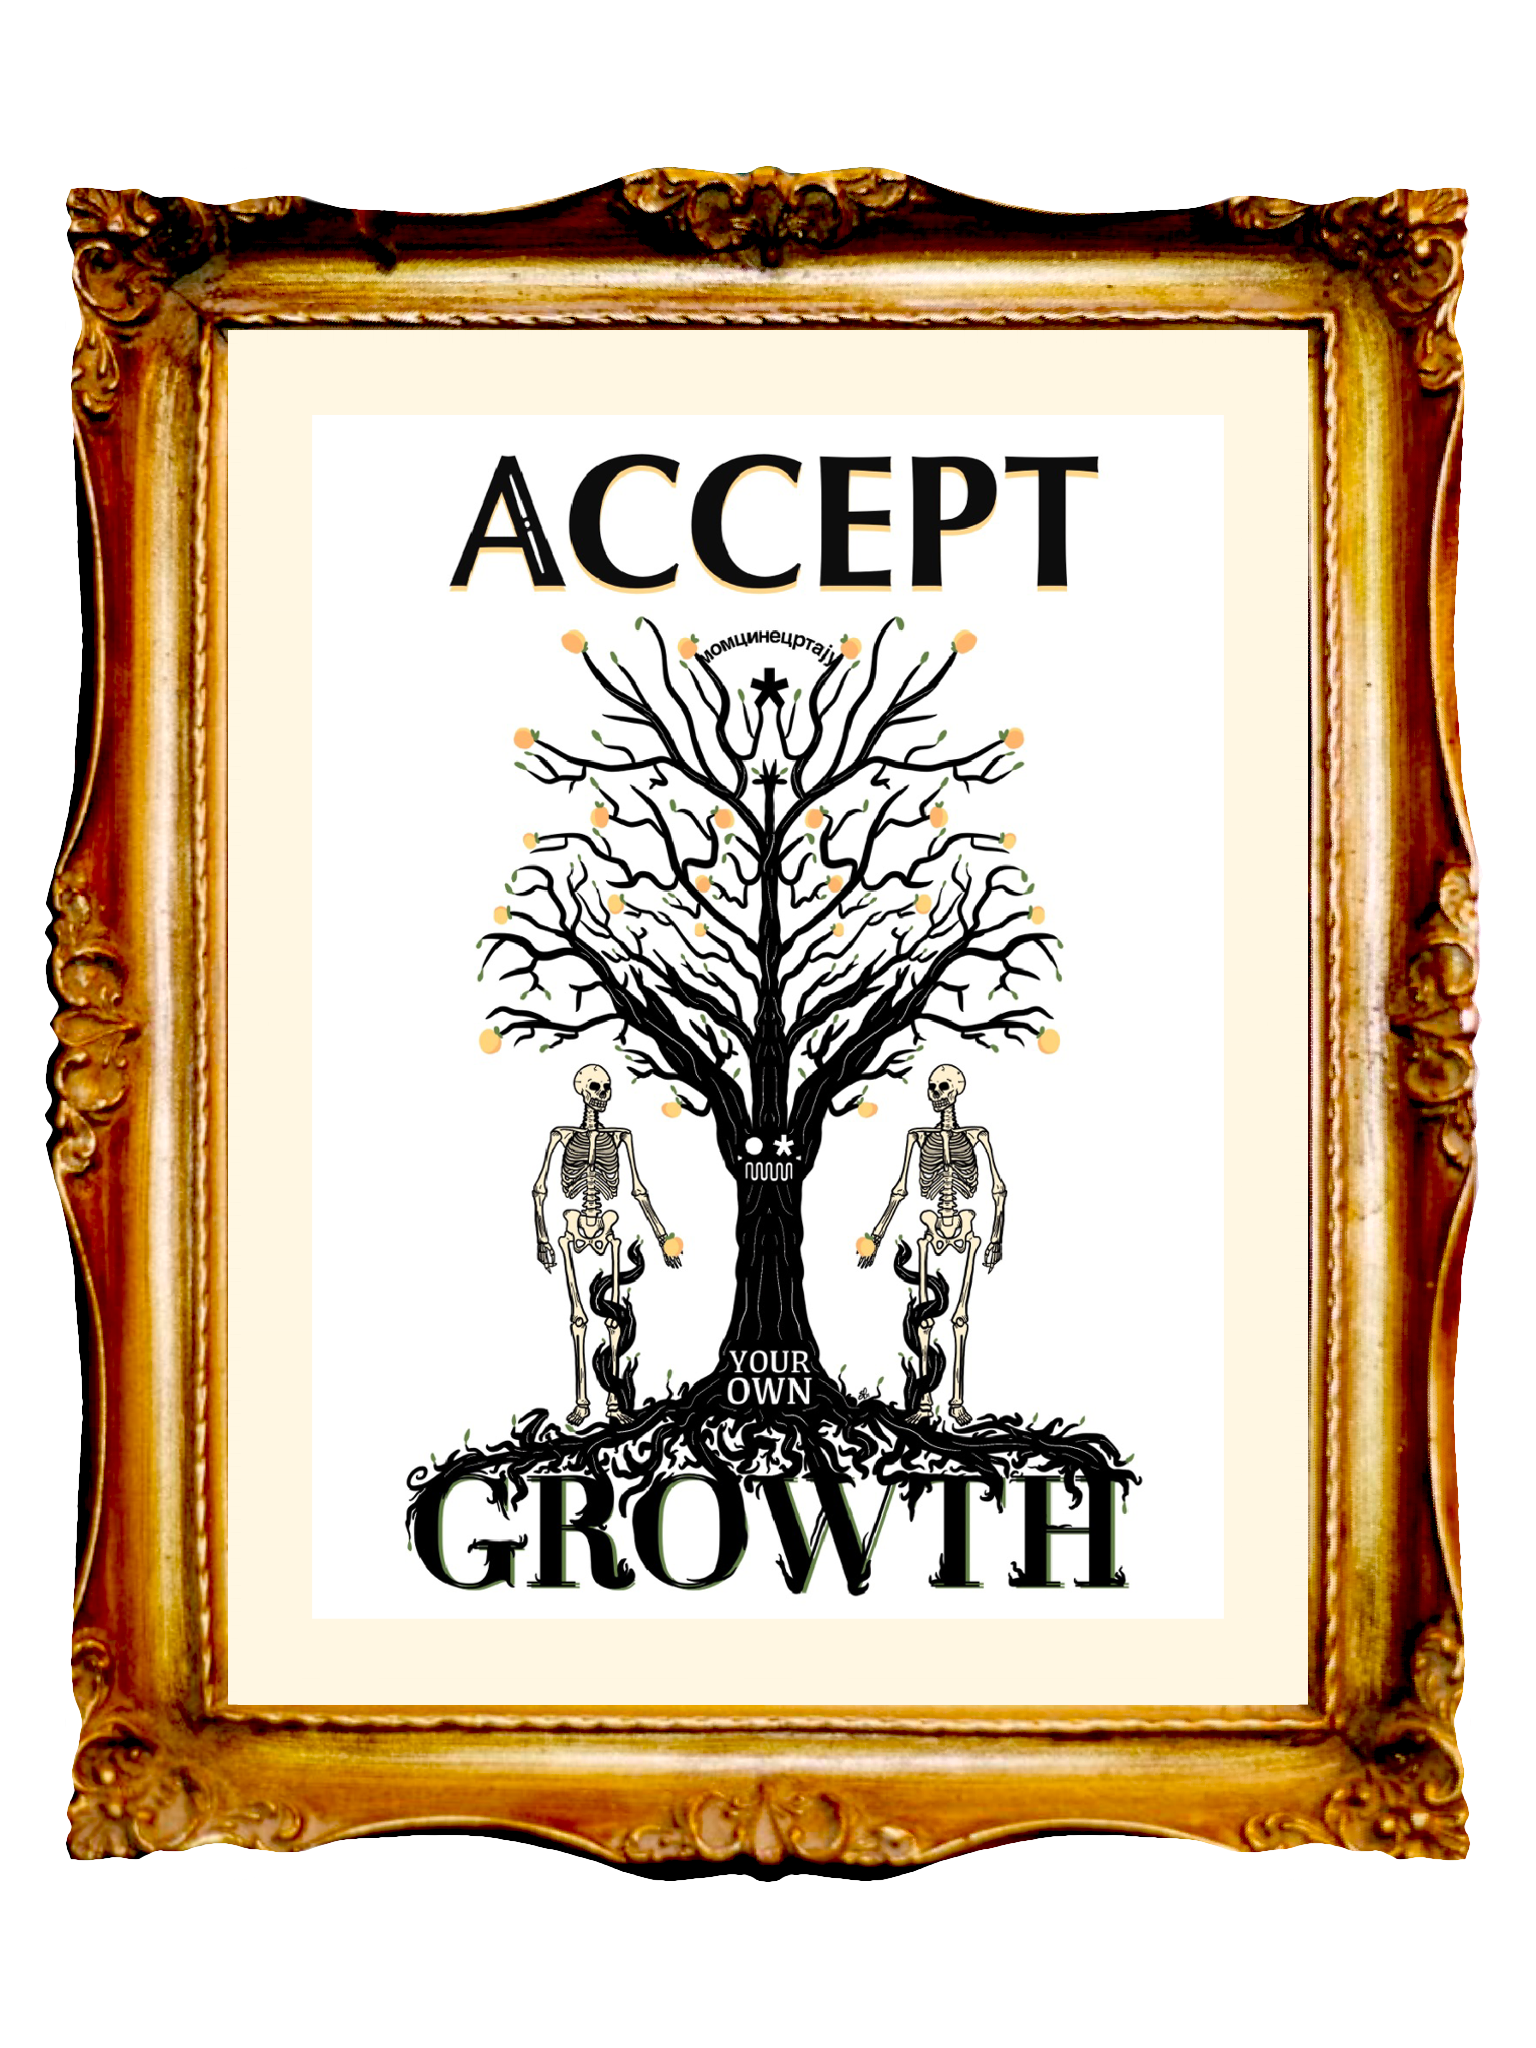 ACCEPT YOUR OWN GROWTH - Limited Poster - BOYSDONTDRAW